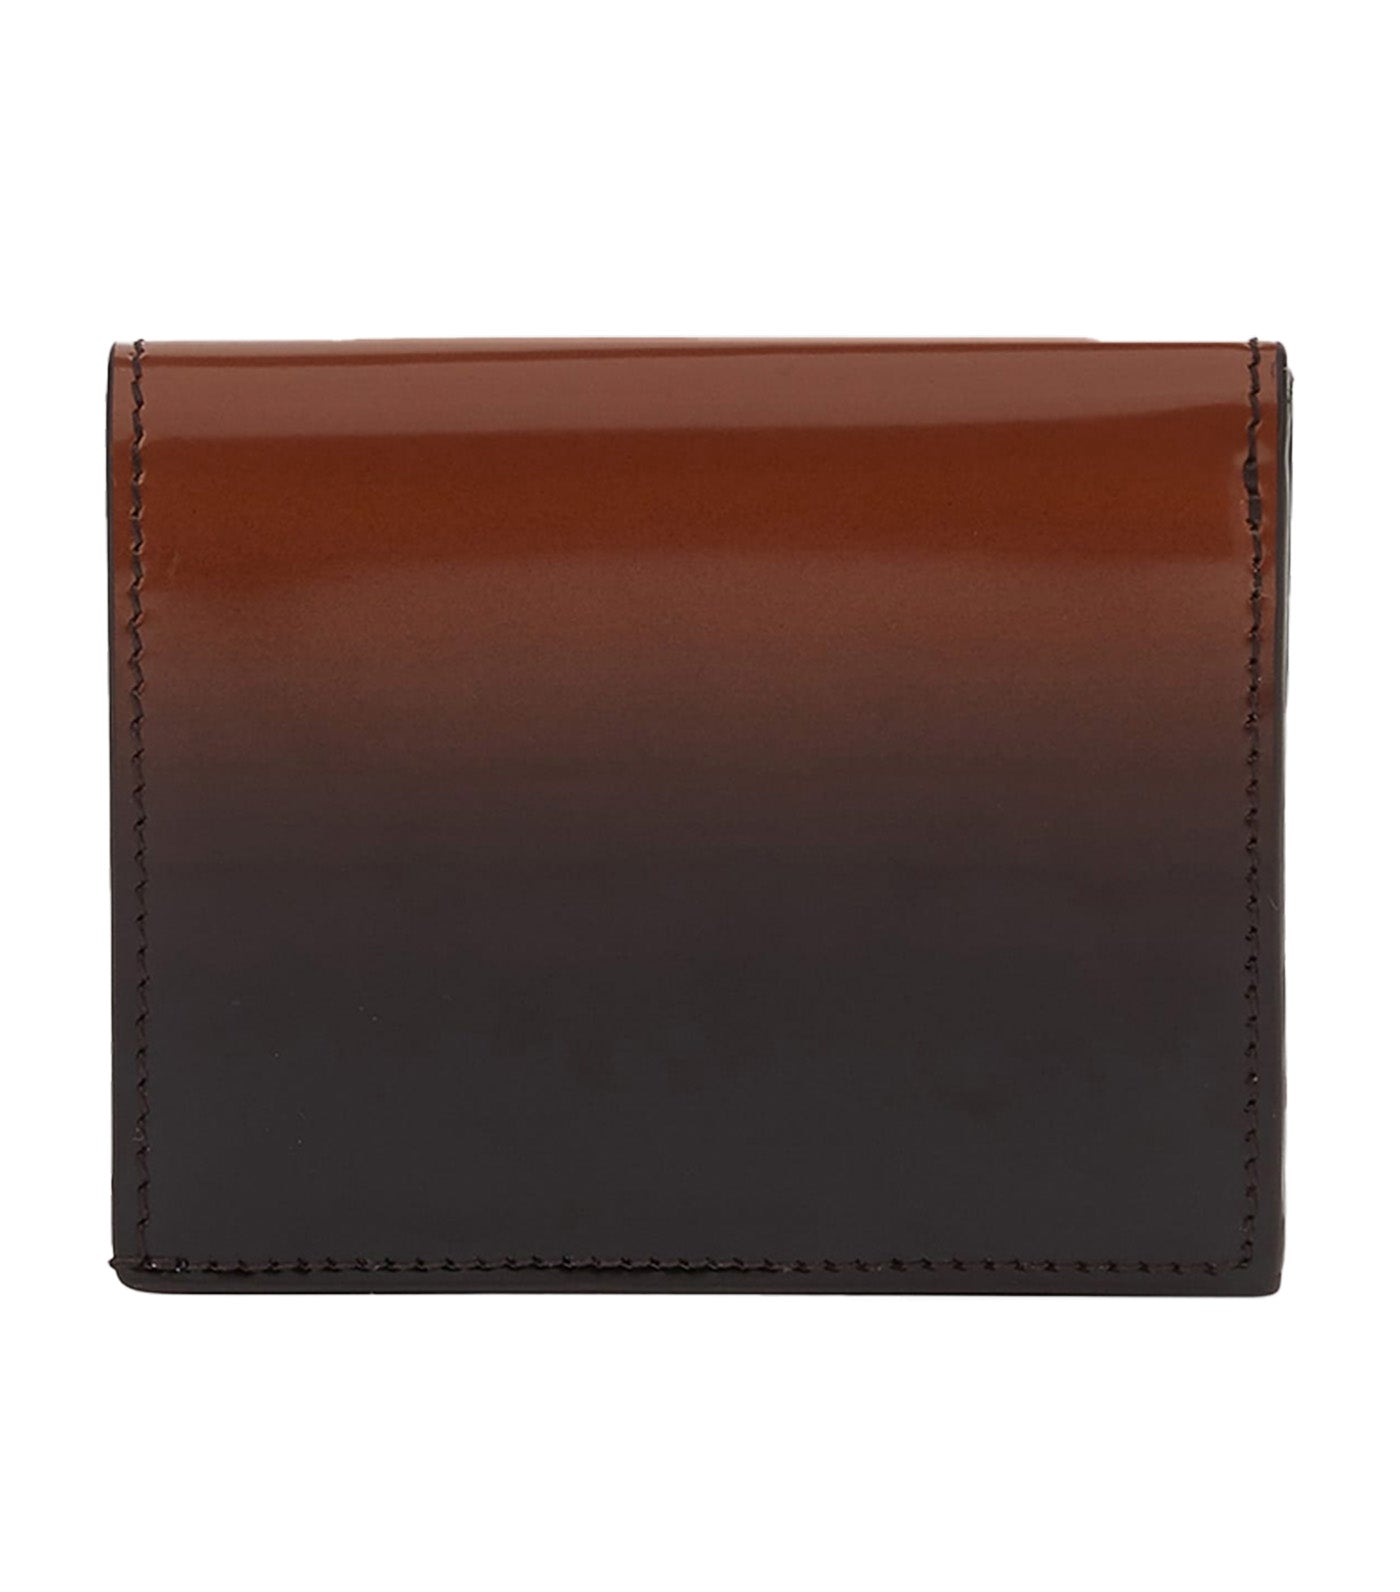 Compact Wallet with Gancini Clasp Tan/Brown